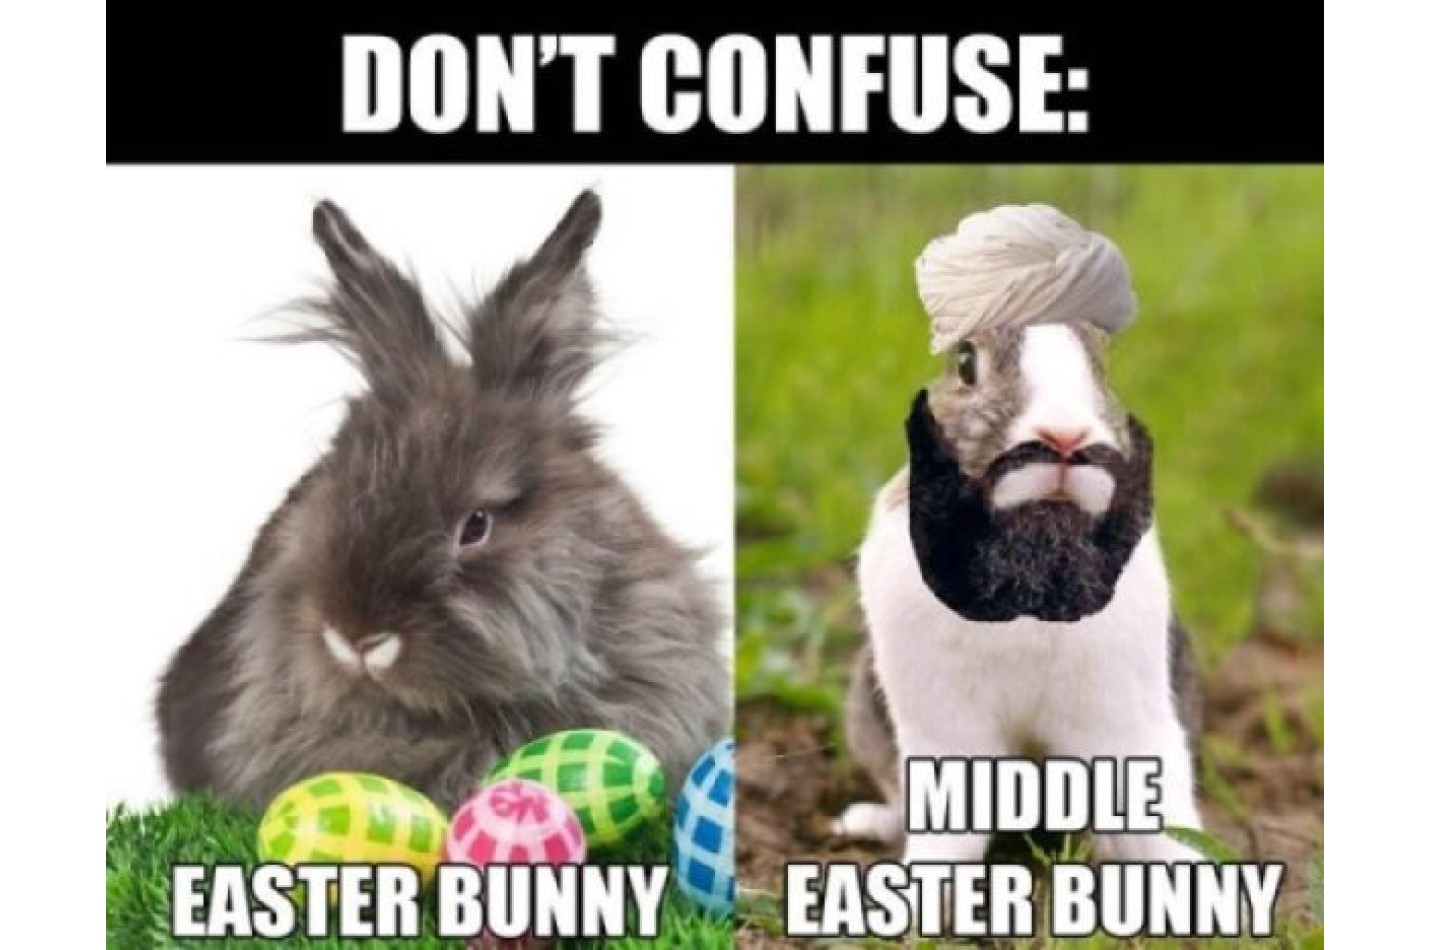 Easter Bunny vs Middle Easter Bunny image